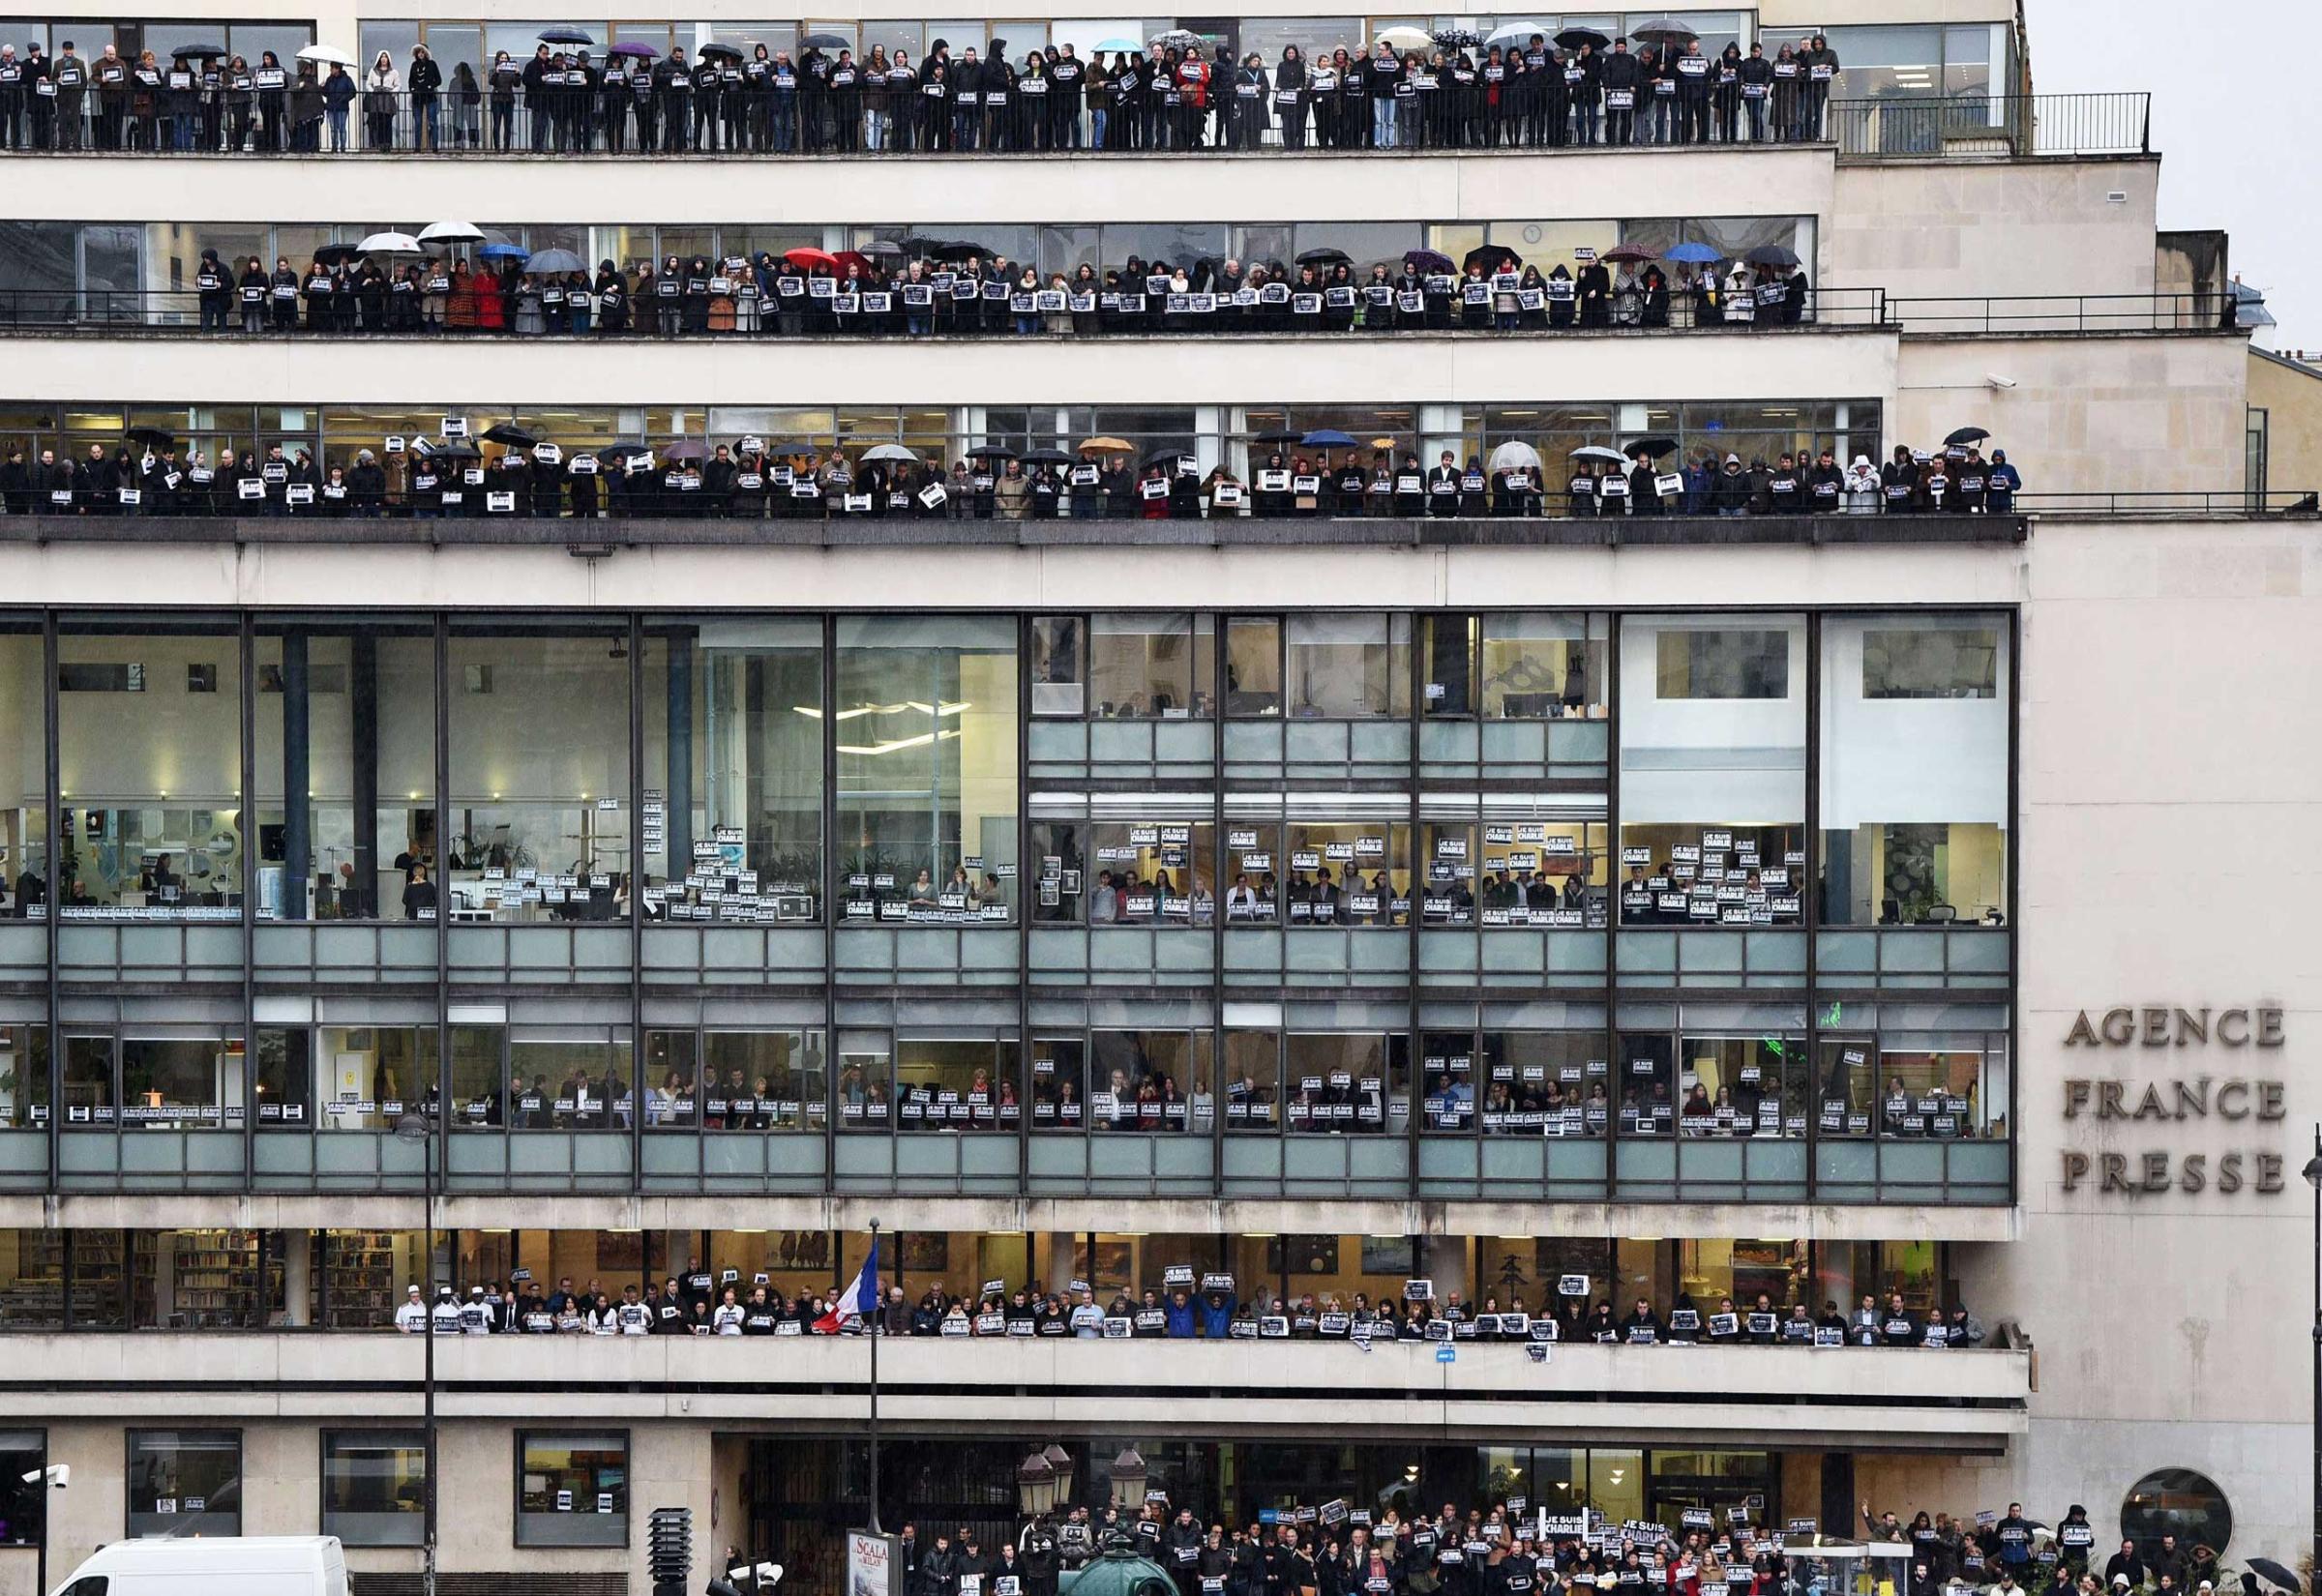 Journalists of international press agency Agence France-Presse hold signs reading "Je suis Charlie" (I am Charlie) at their headquarters in Paris as they observe a minute of silence on Jan. 8, 2015.